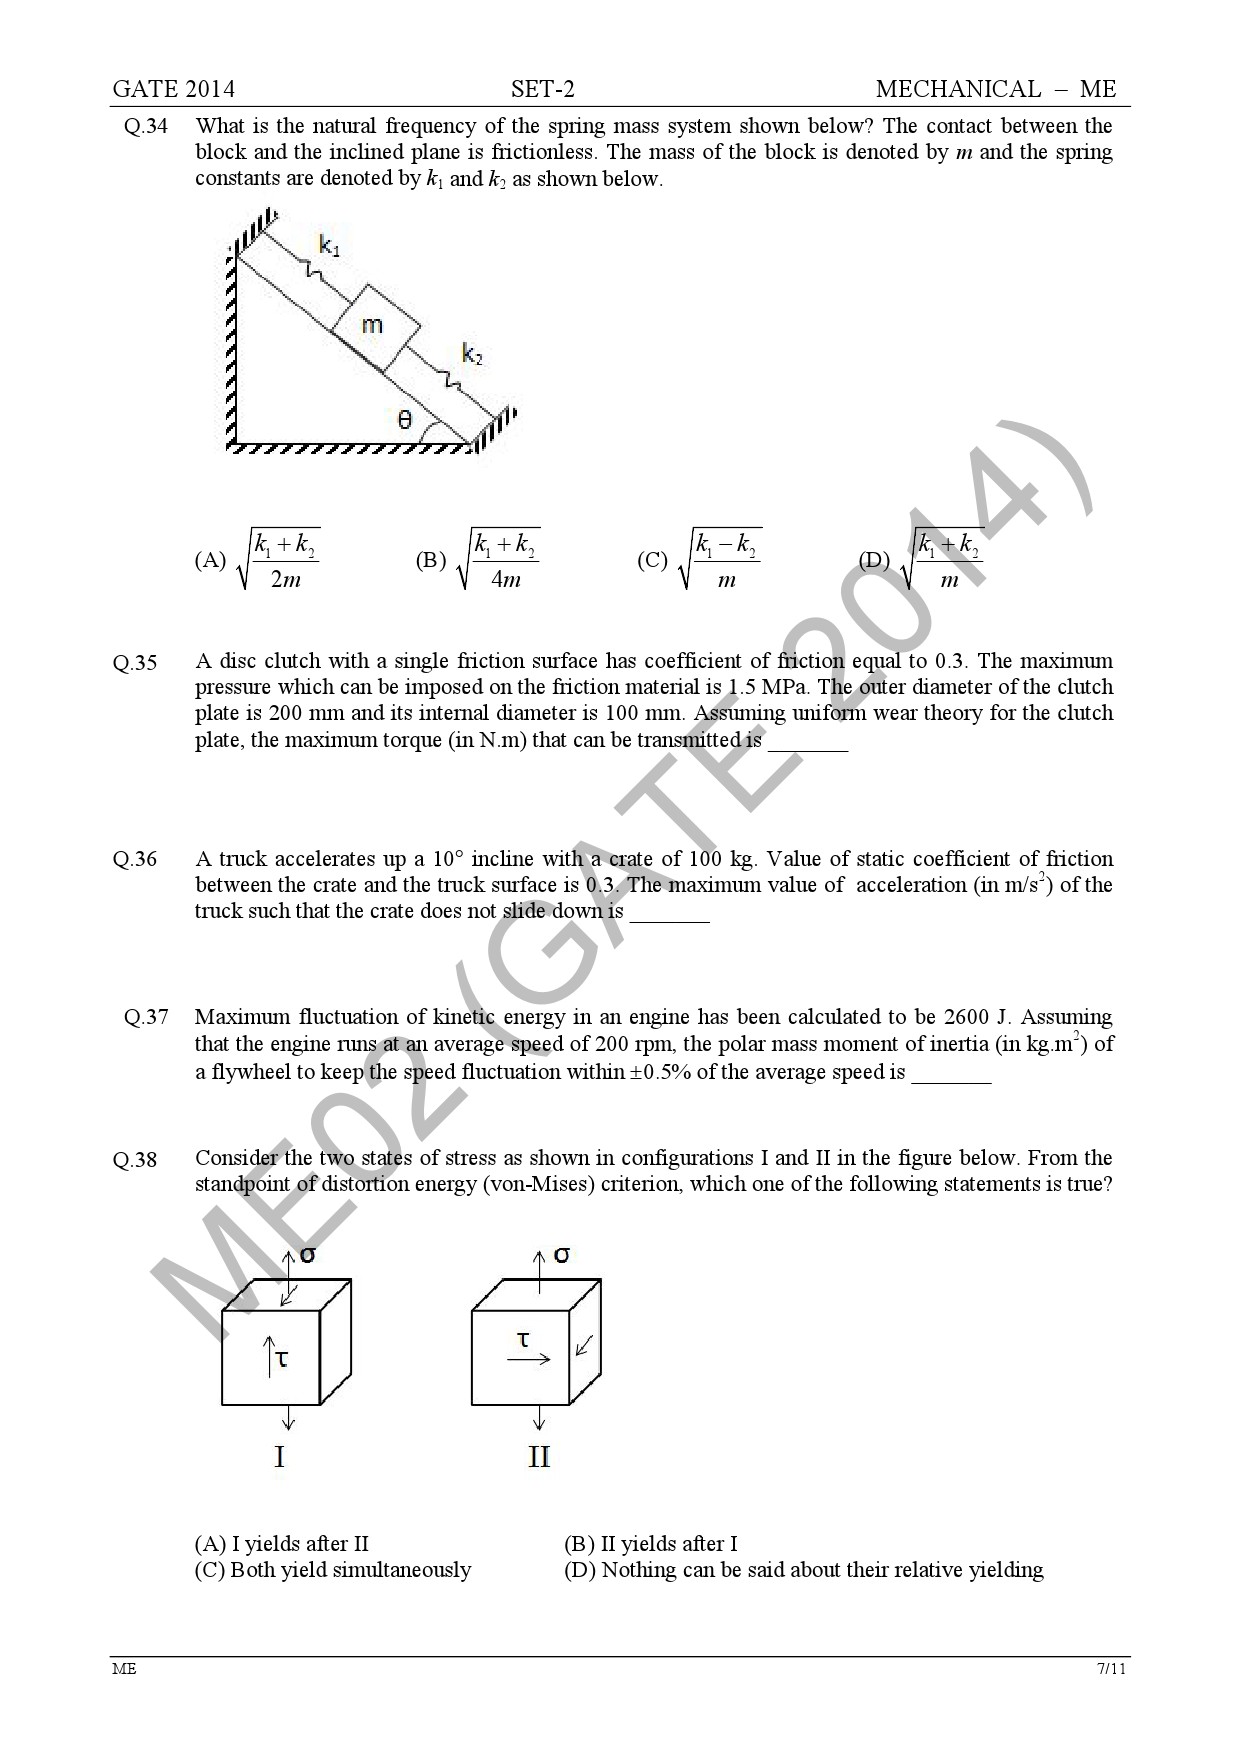 GATE Exam Question Paper 2014 Mechanical Engineering Set 2 13